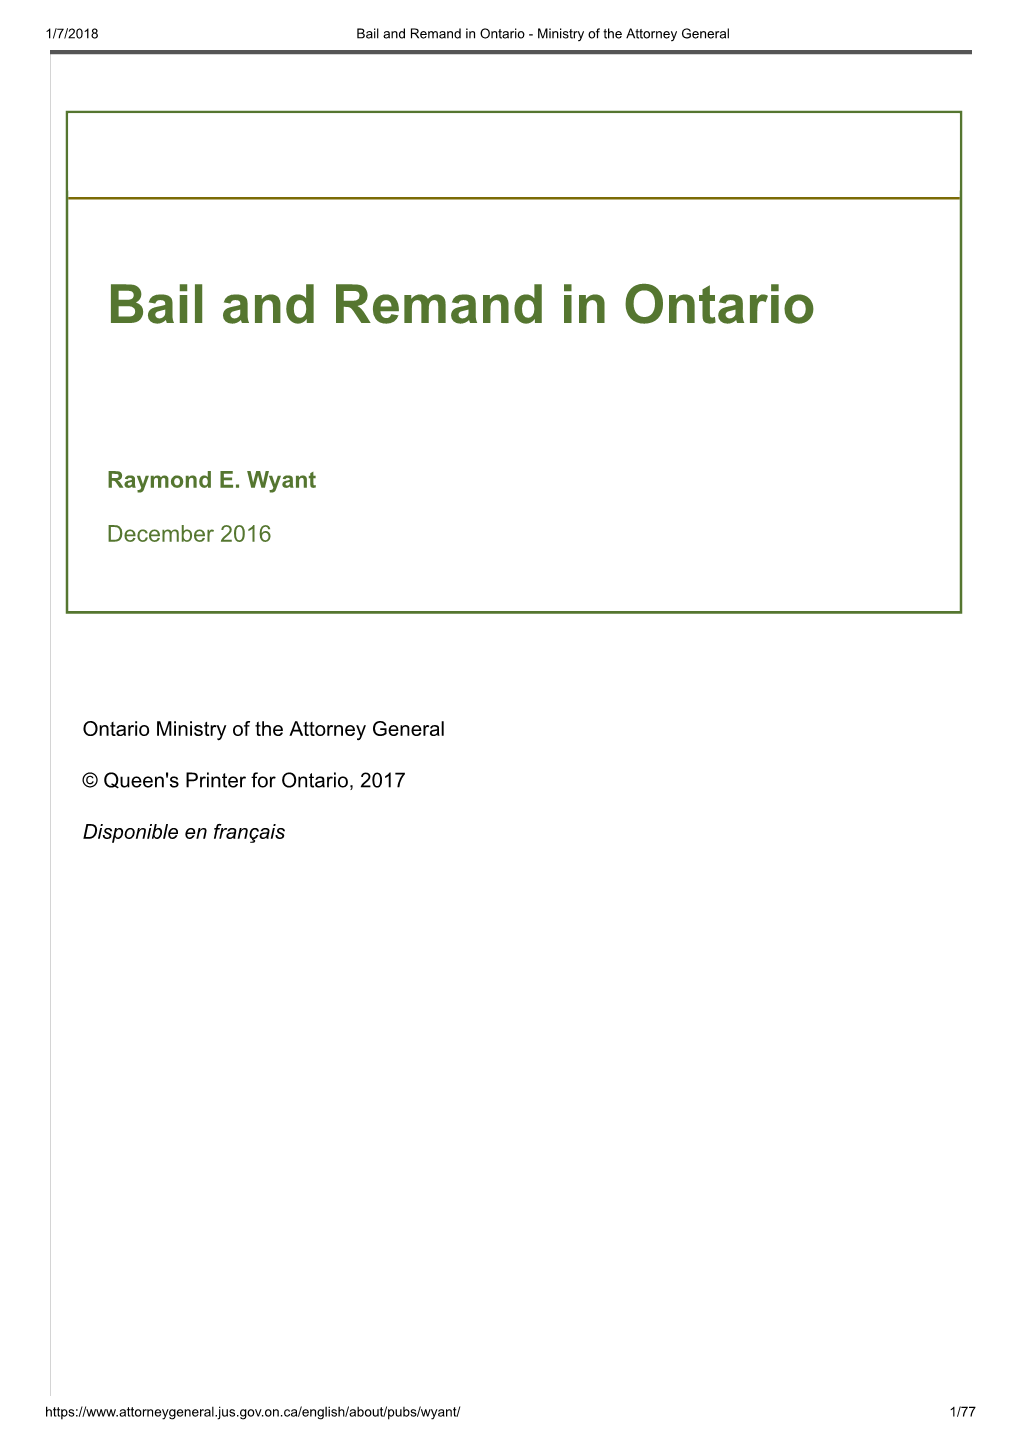 Bail and Remand in Ontario - Ministry of the Attorney General